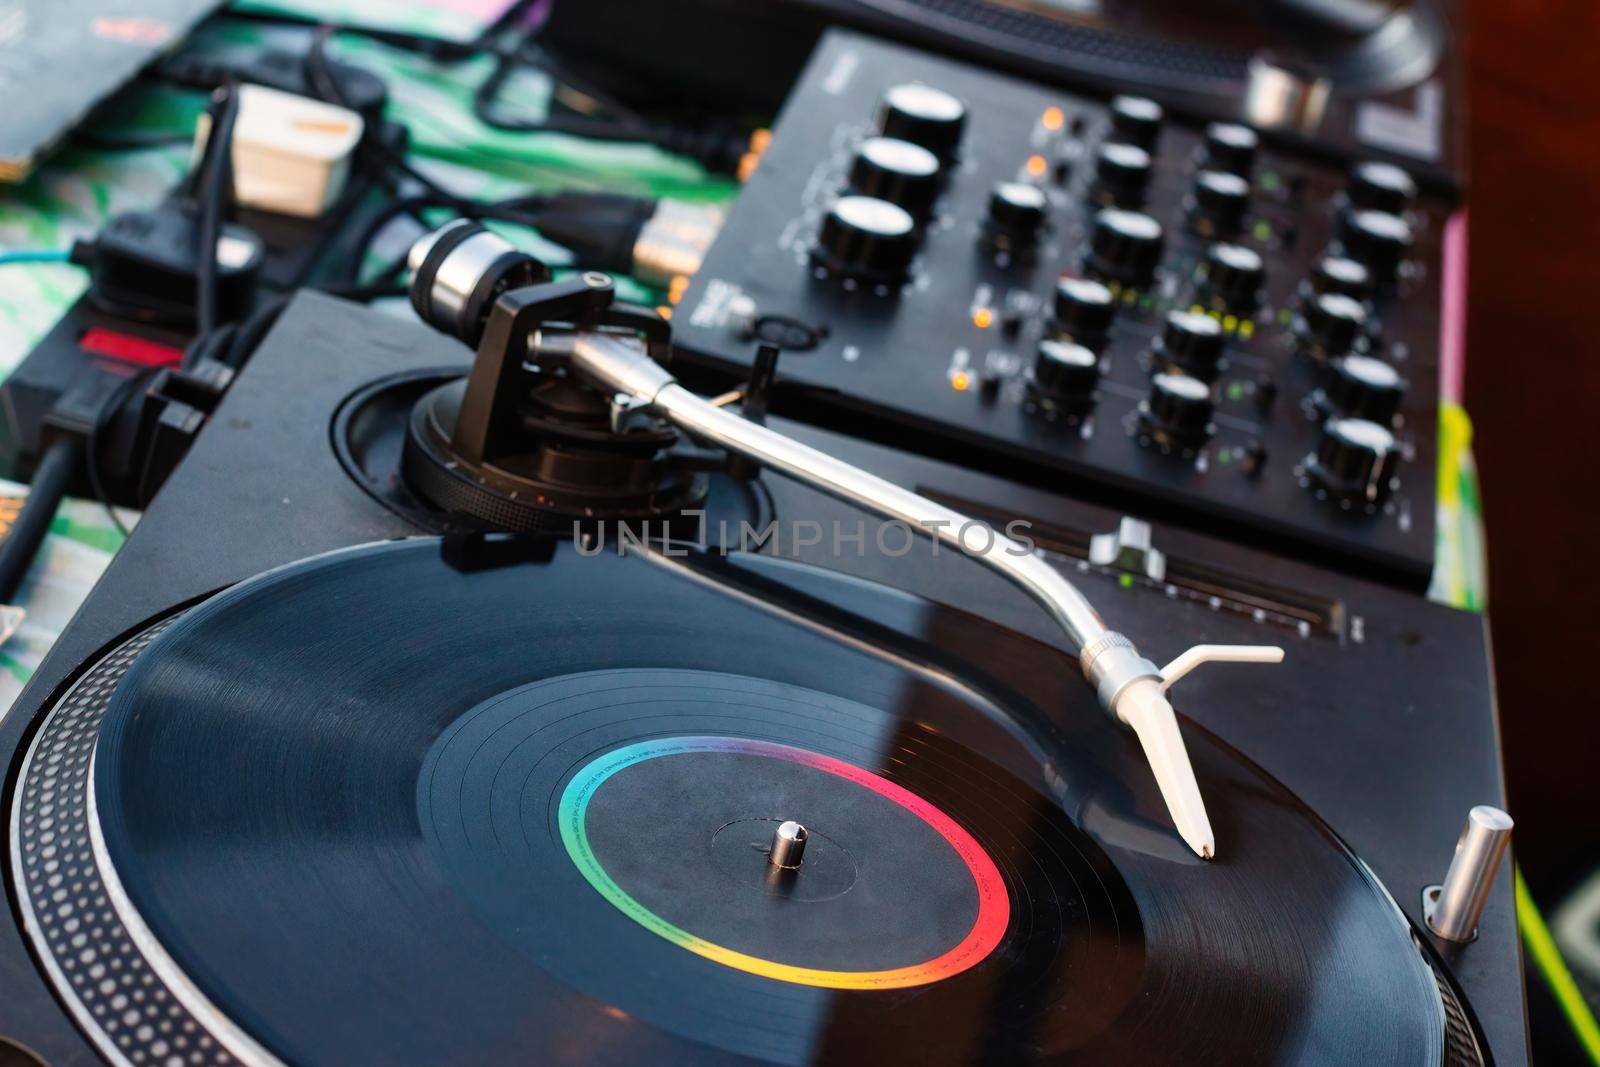 Vinyl record on a deejay's turntable with mixing desk equipment sound system